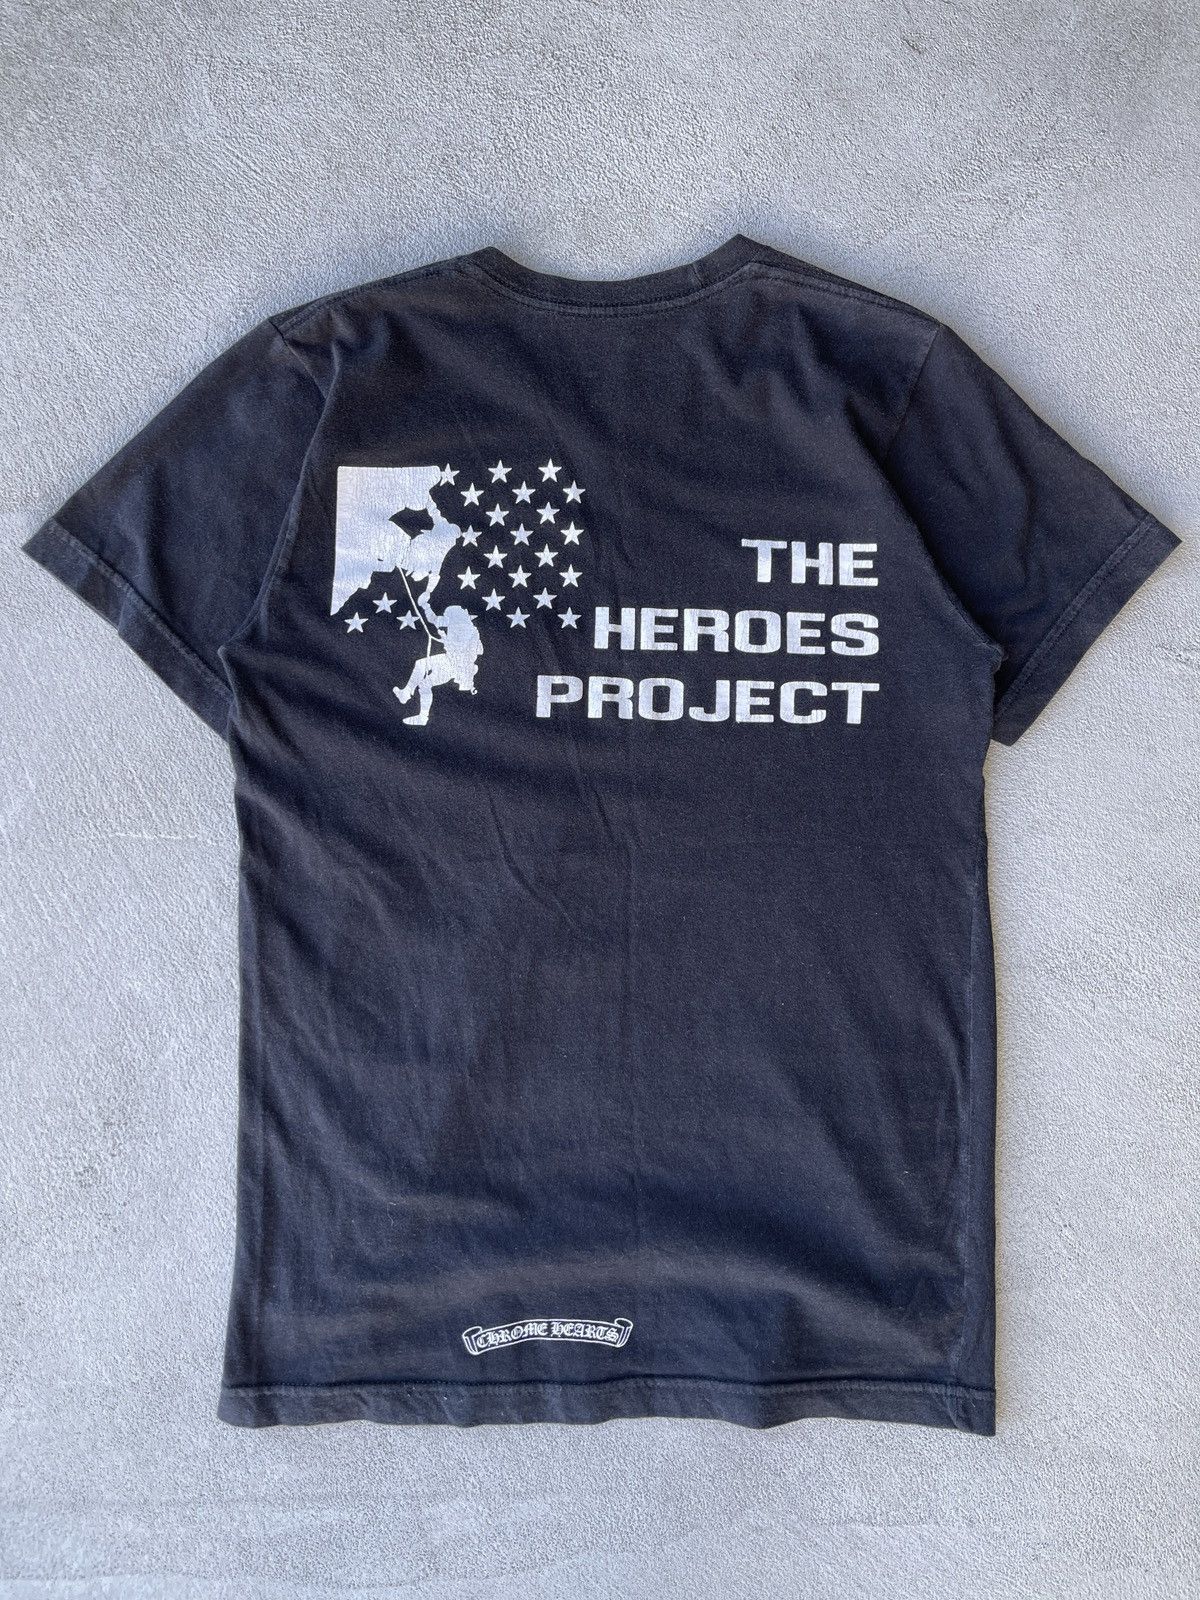 STEAL! 2010s Chrome Hearts The Heroes Project Pocket Tee - 1